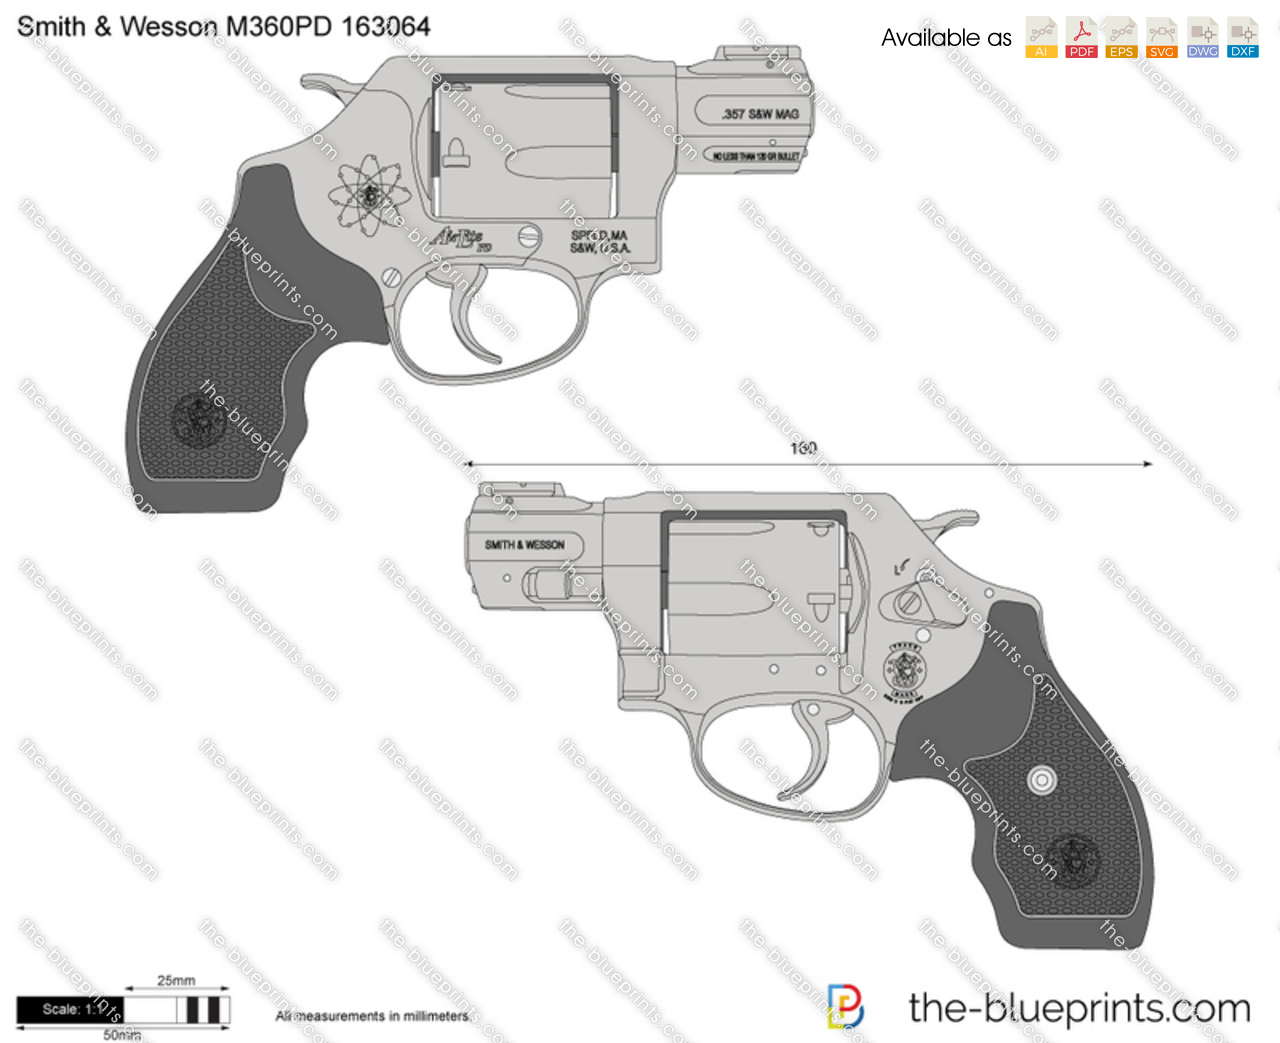 Smith & Wesson M360PD 163064